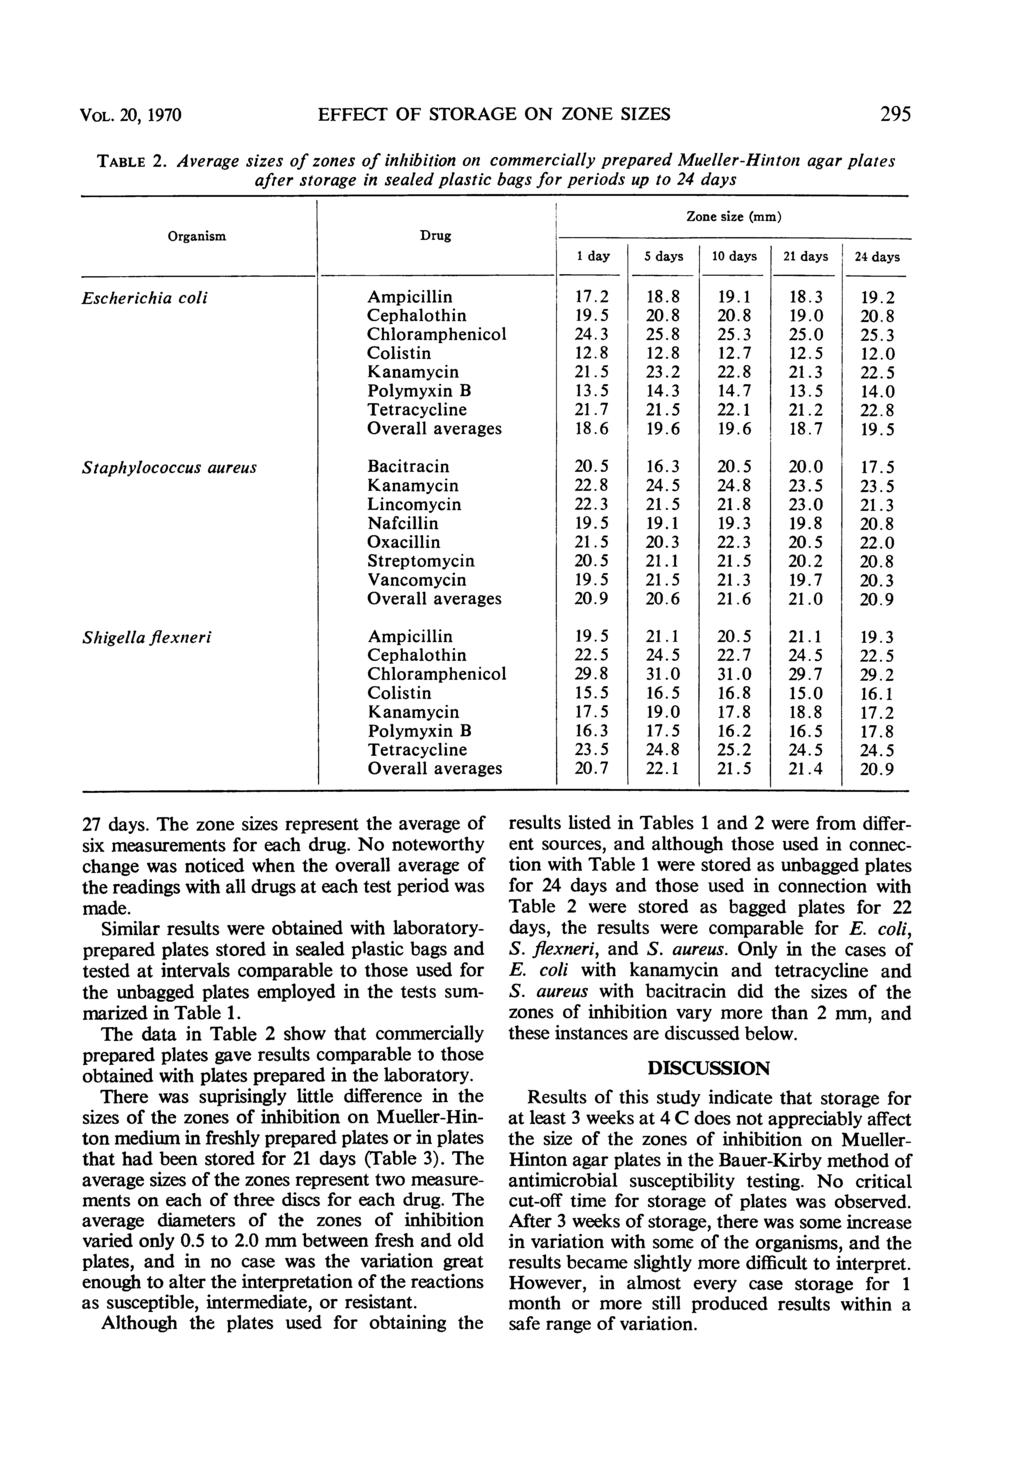 VOL. 20, 1970 EFFECT OF STORAGE ON ZONE SIZES 295 TABLE 2.